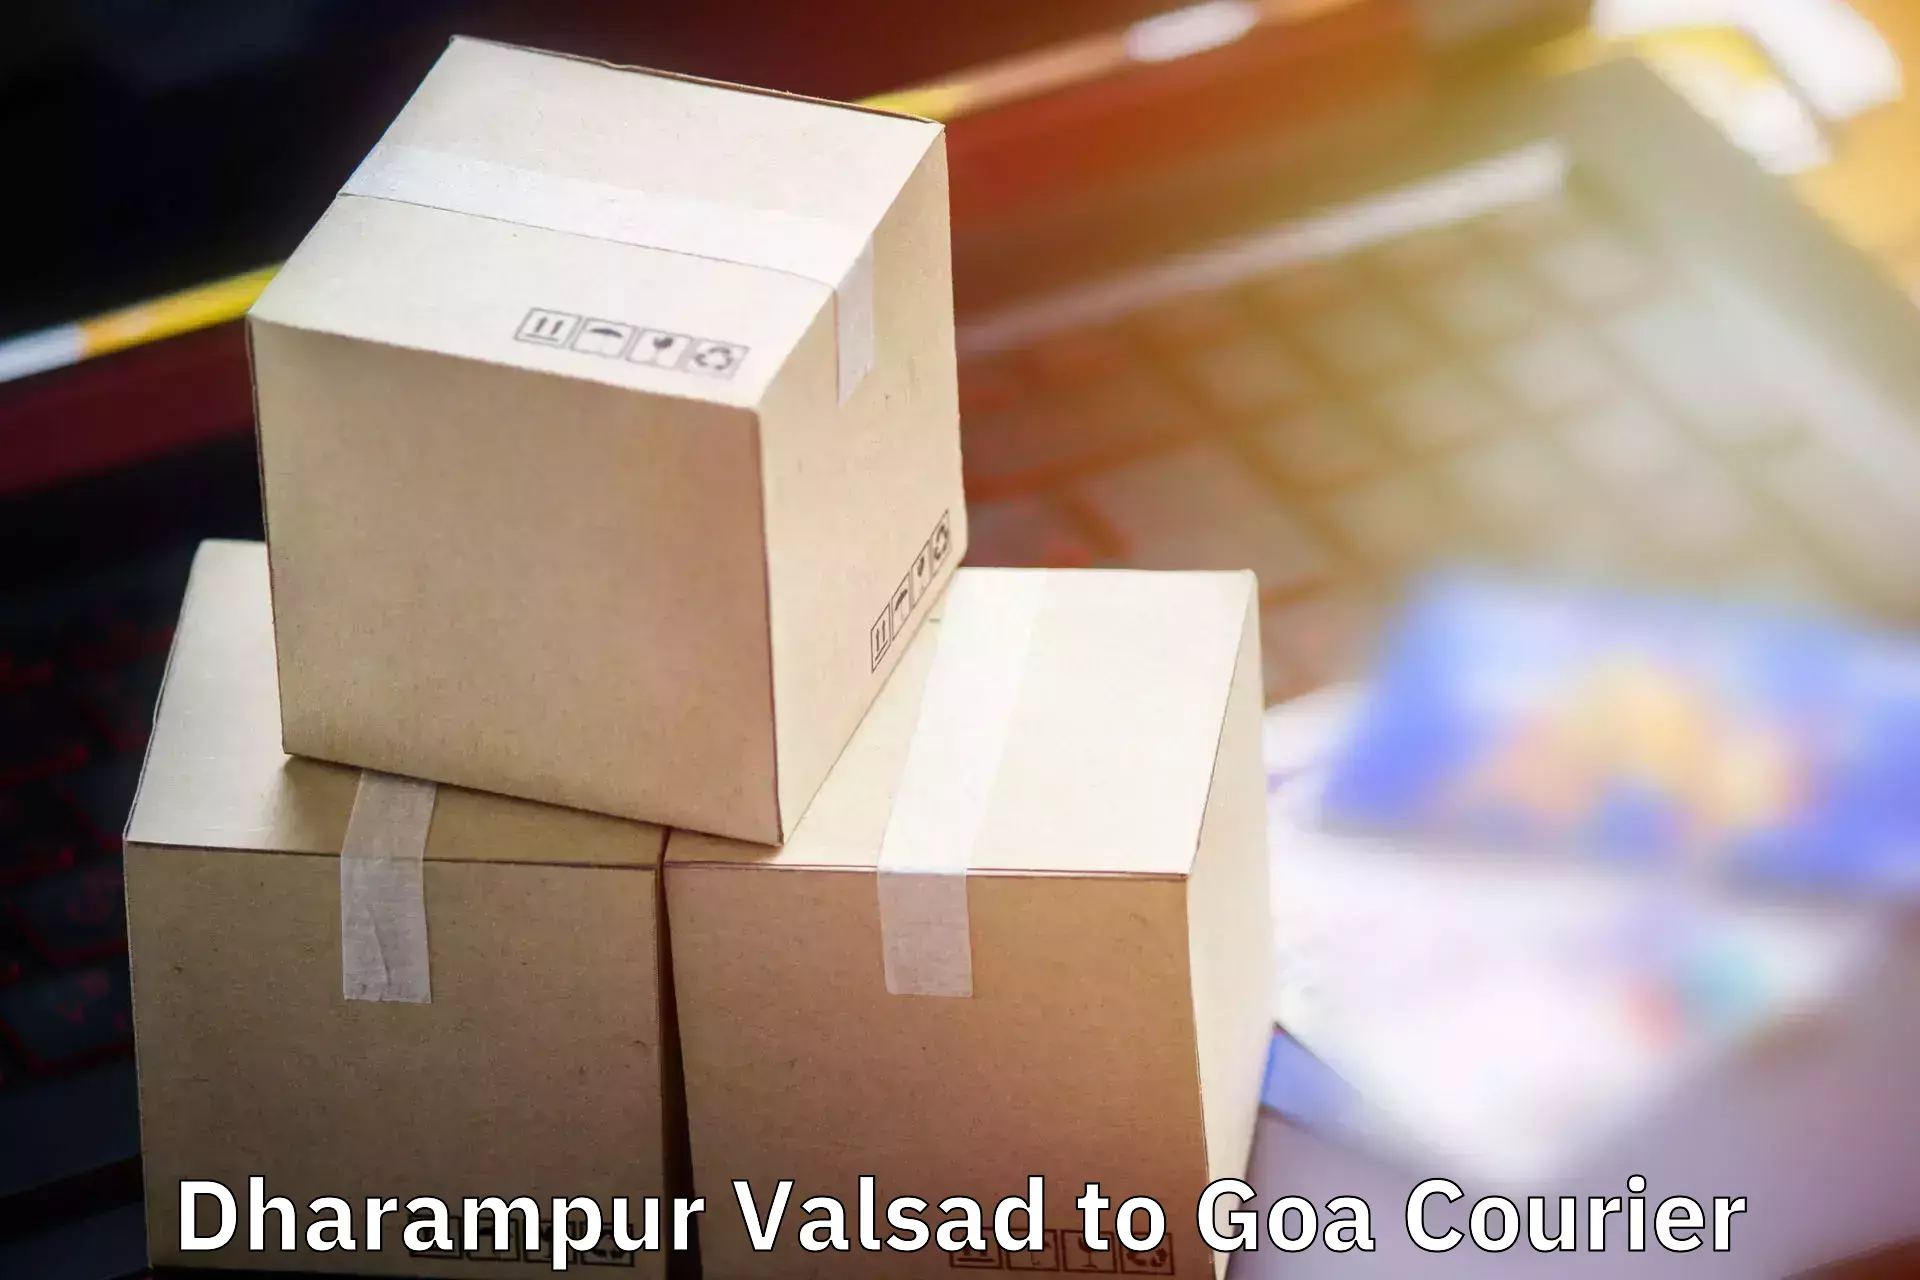 Luggage shipping service Dharampur Valsad to South Goa